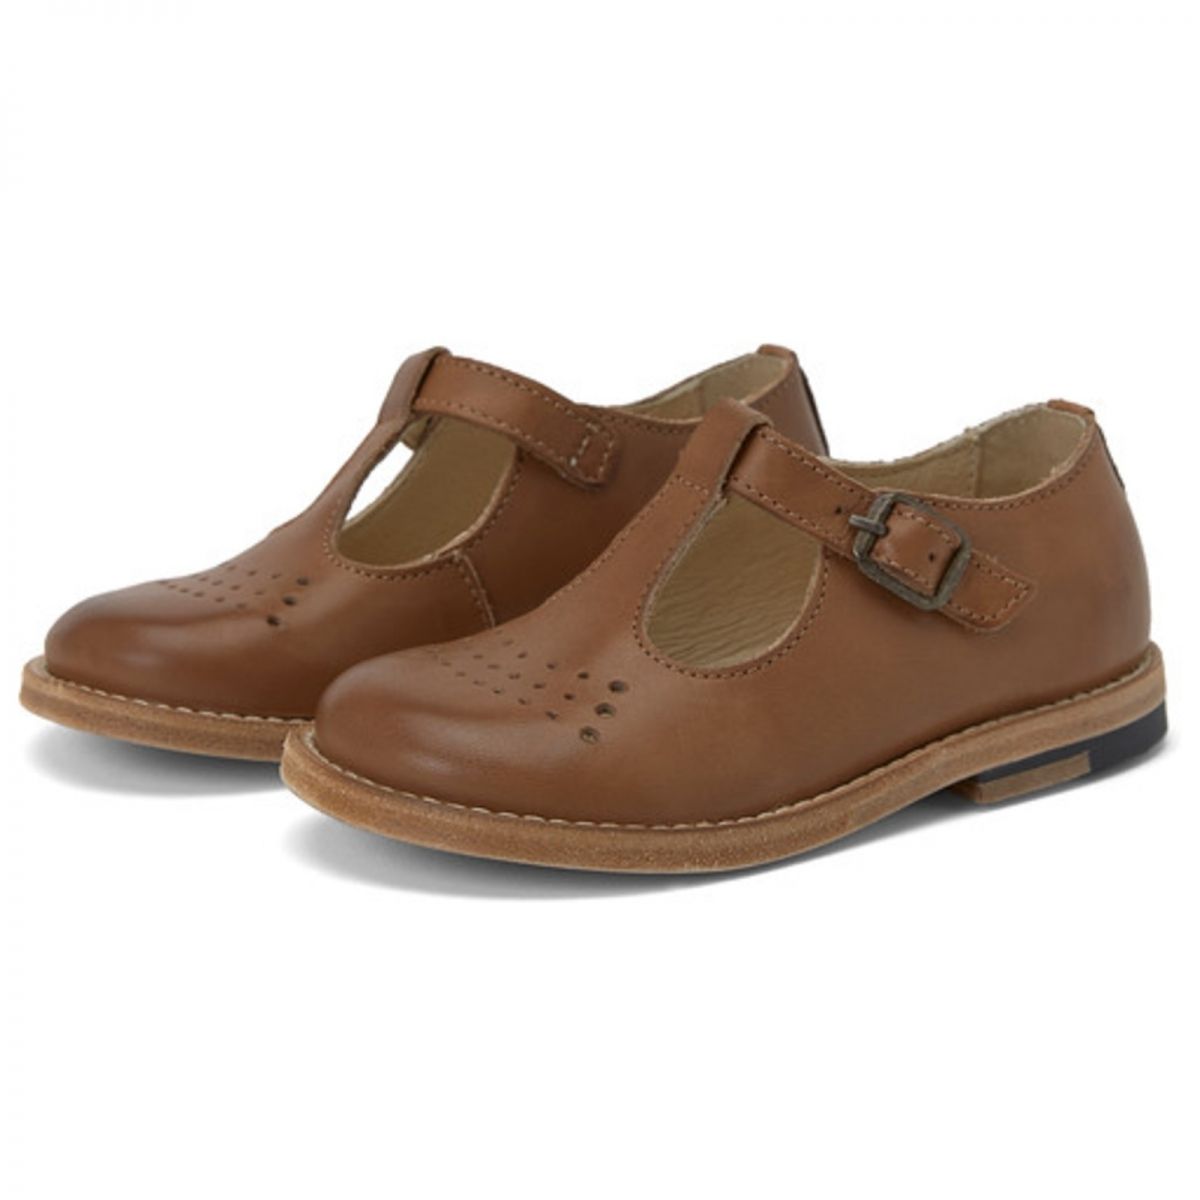 Young Soles T-bar Shoe Dottie Burnished Leather brown